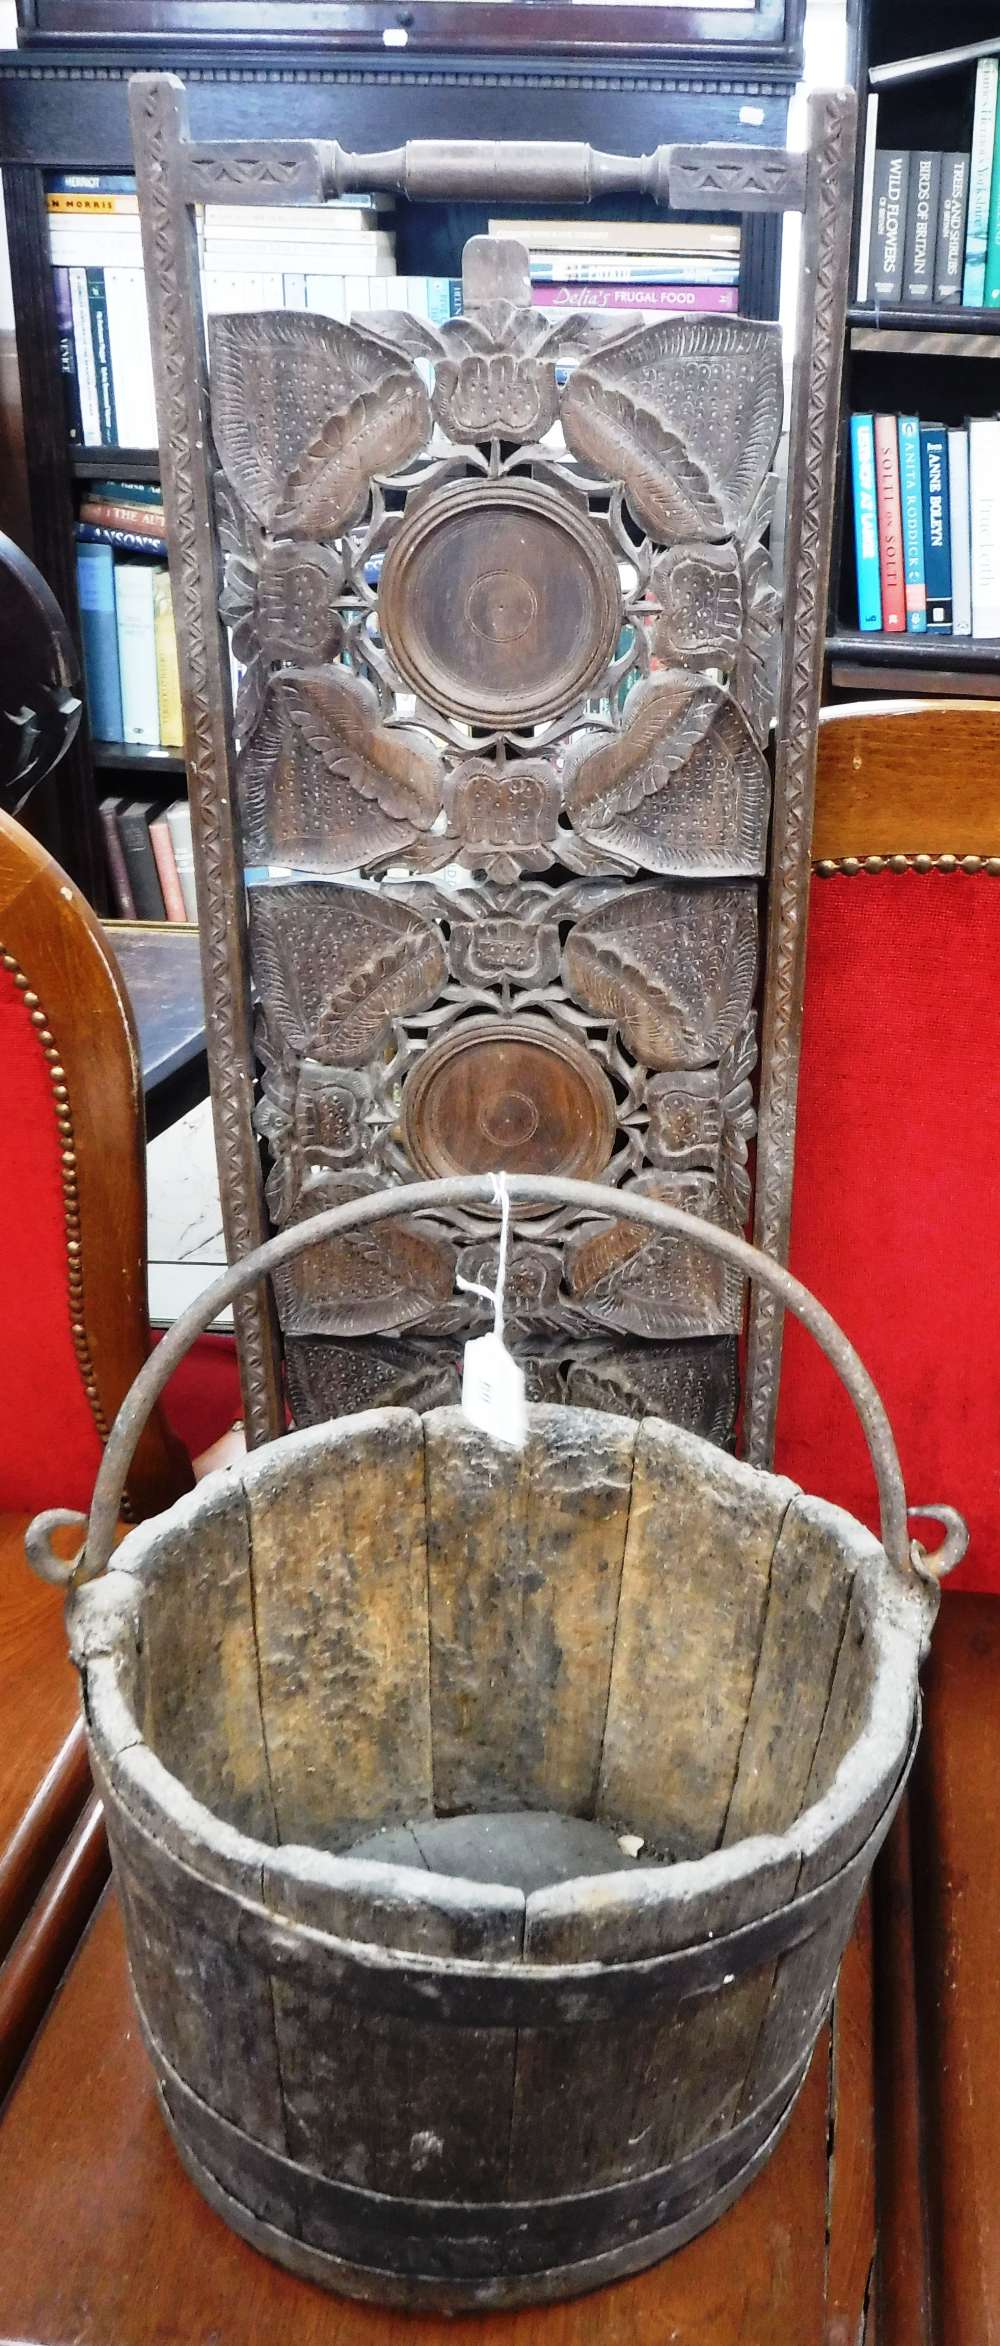 A 19TH CENTURY METAL BOUND BUCKET with iron swing handle and a folding cake stand with carved